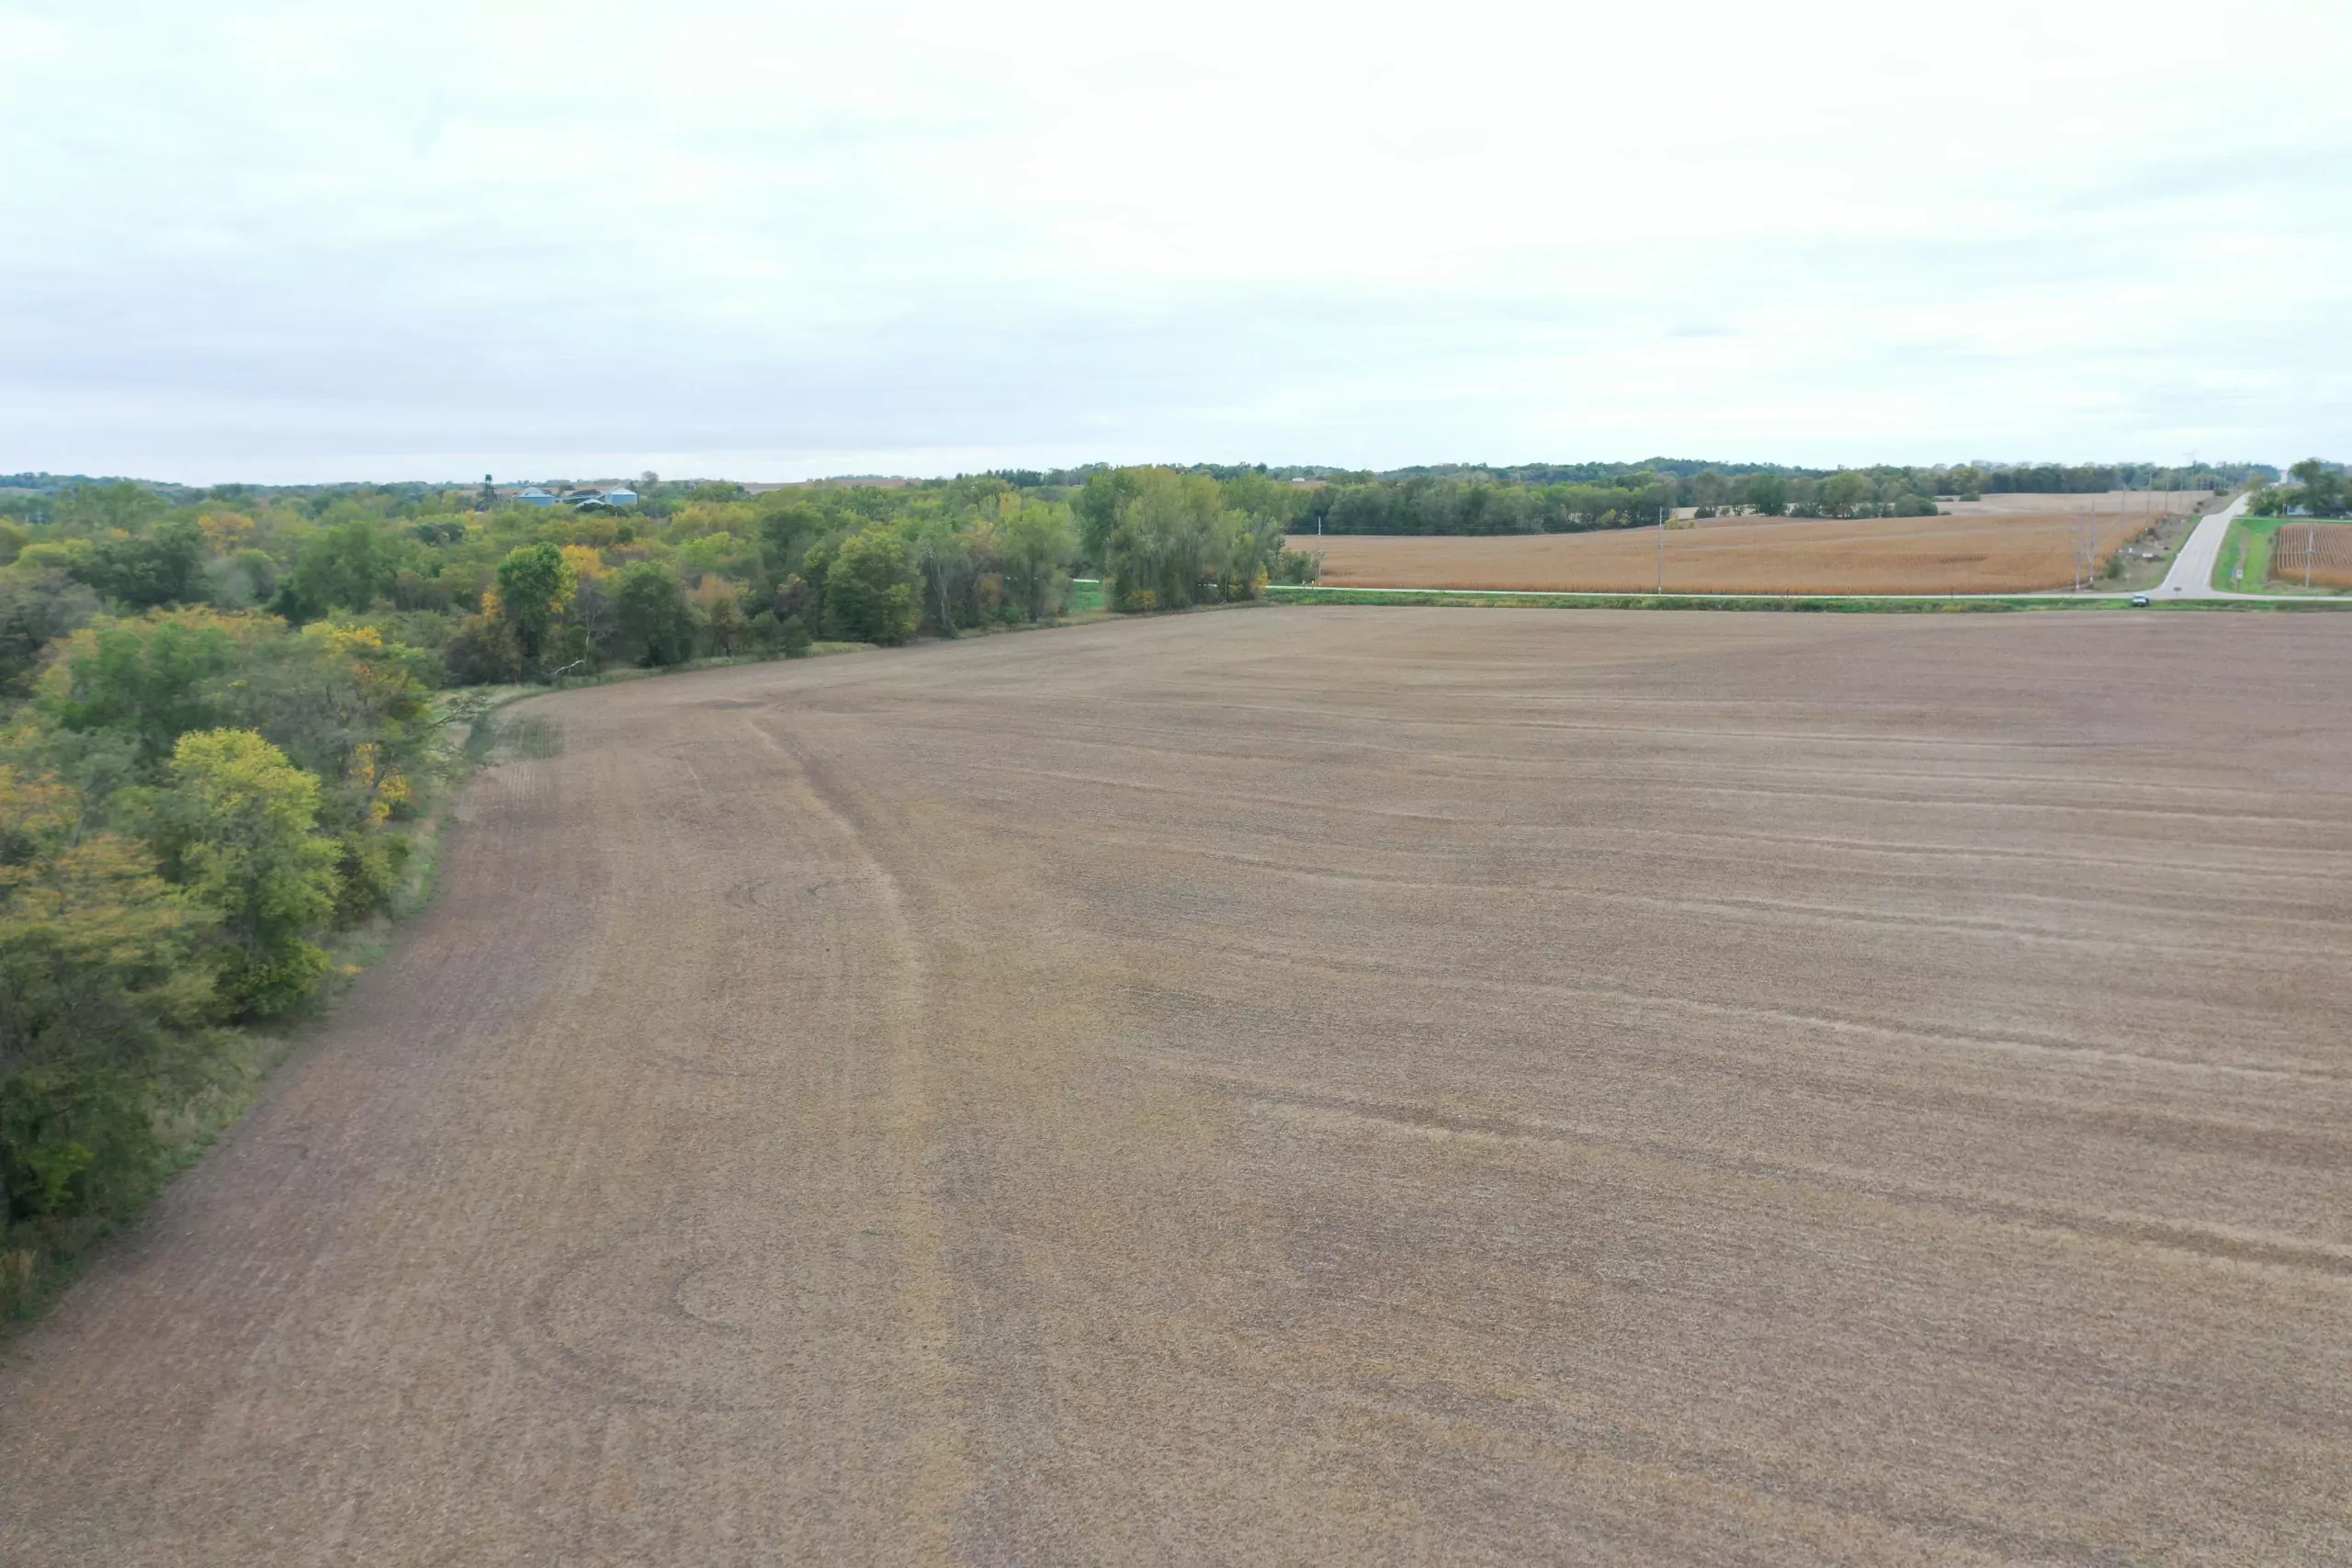 auctions-land-marshall-county-iowa-189-acres-listing-number-15802-DJI_0521-2.webp